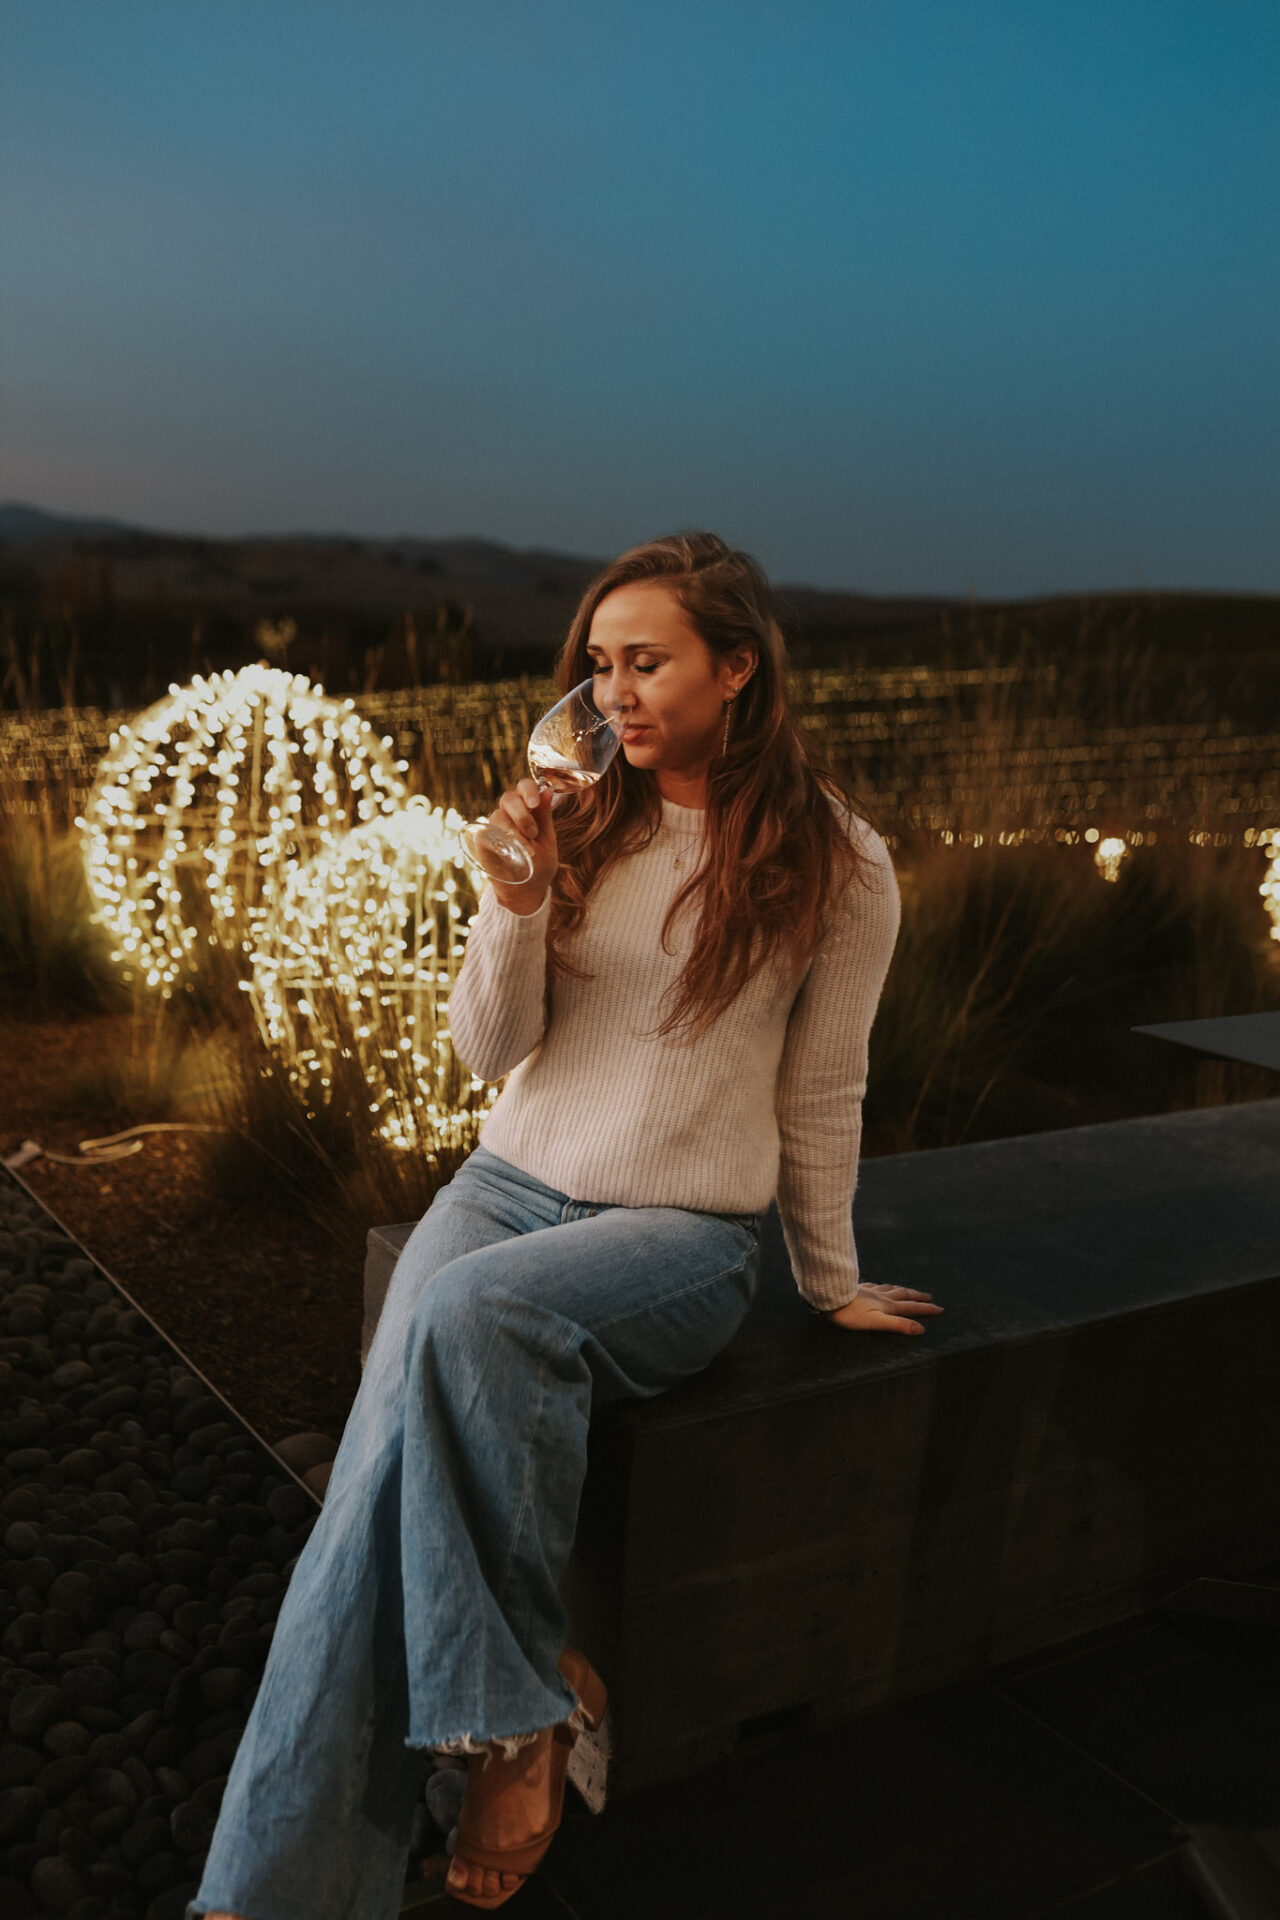 Paige with a glass of wine in front of holiday lights